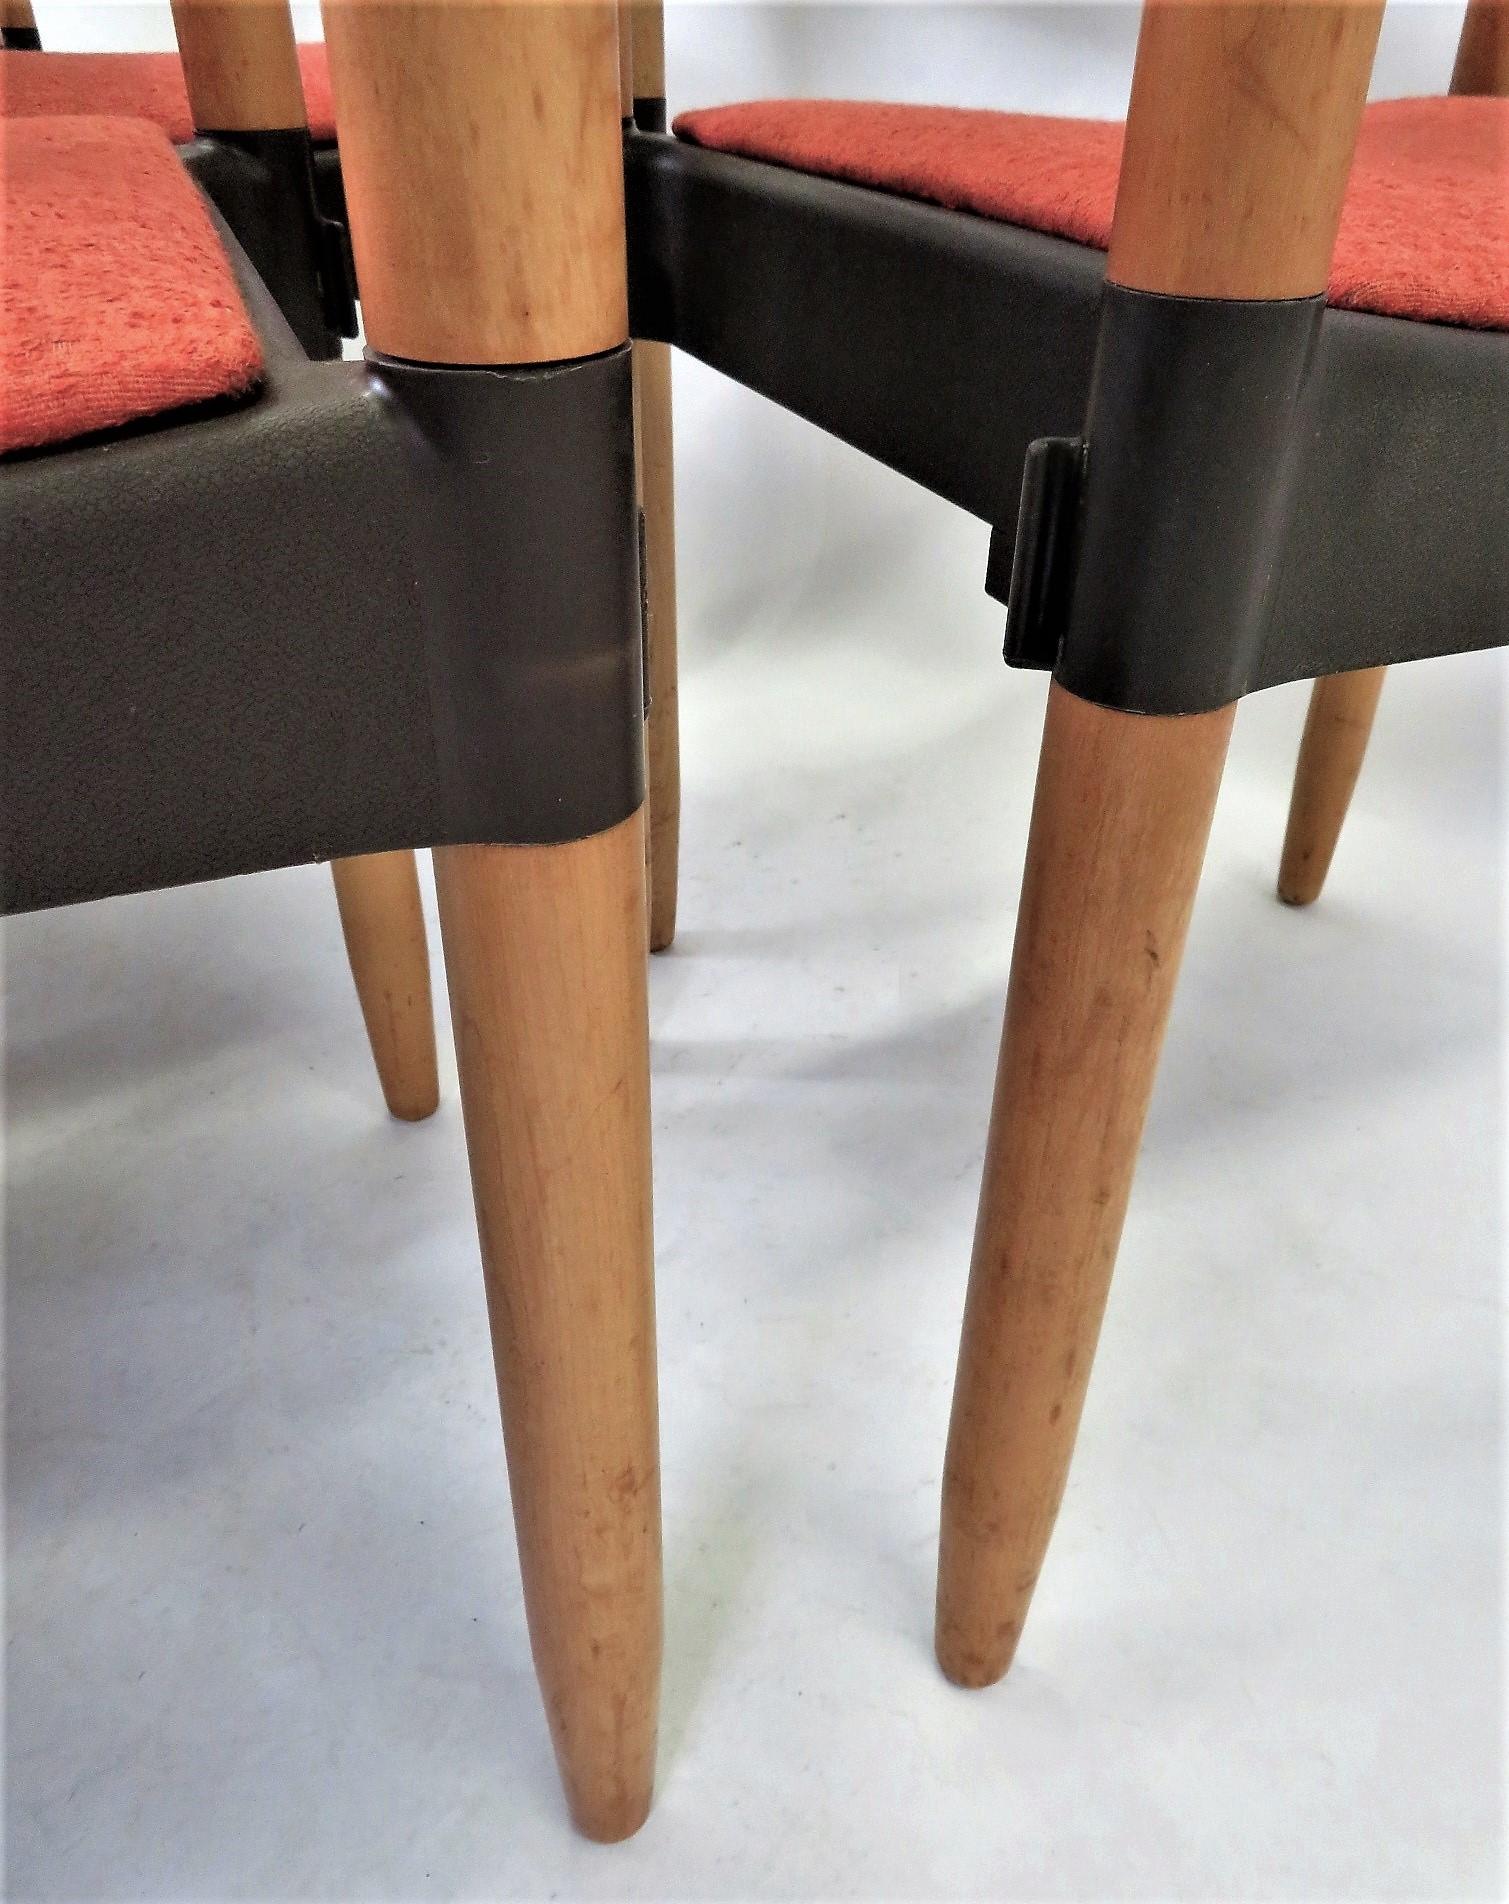 6 Strax Dining Chairs by Casala / Germany 1970s by Harmut Lohmeyer 8